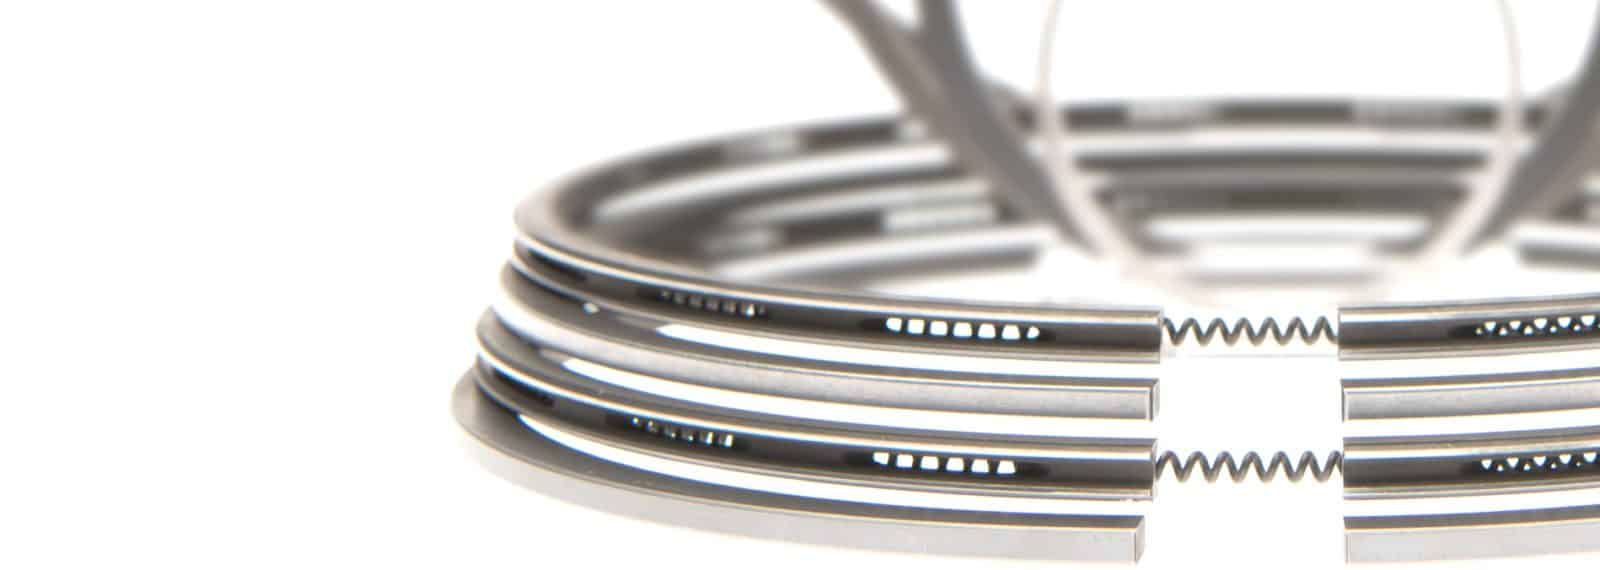 SPEED-PRO PISTON RINGS - DESIGN, FEATURES, and ... - AA1Car